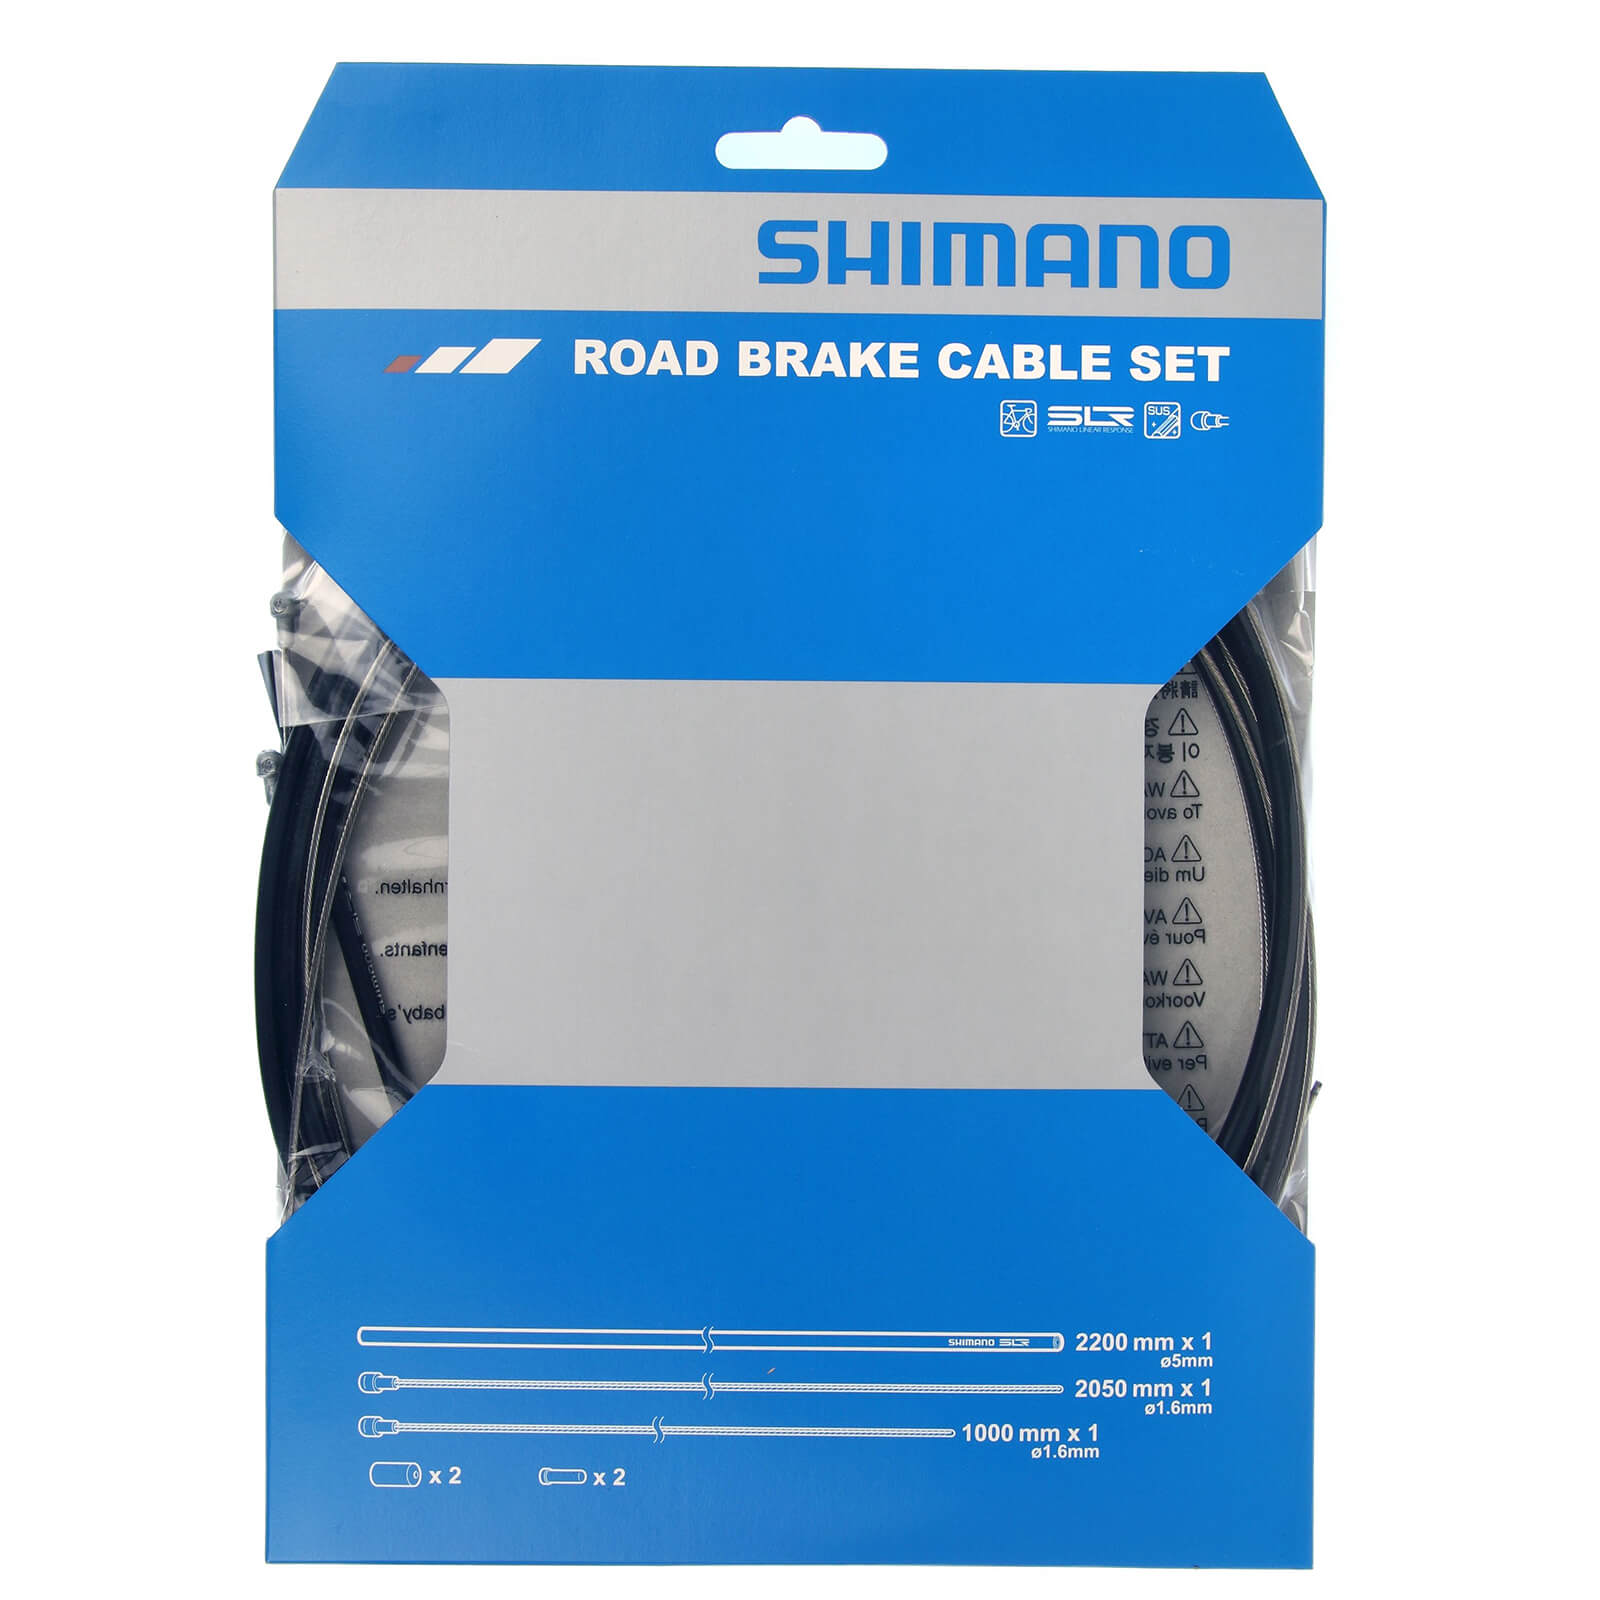 Shimano Road Brake Cable Set With Stainless Steel Inner - Black